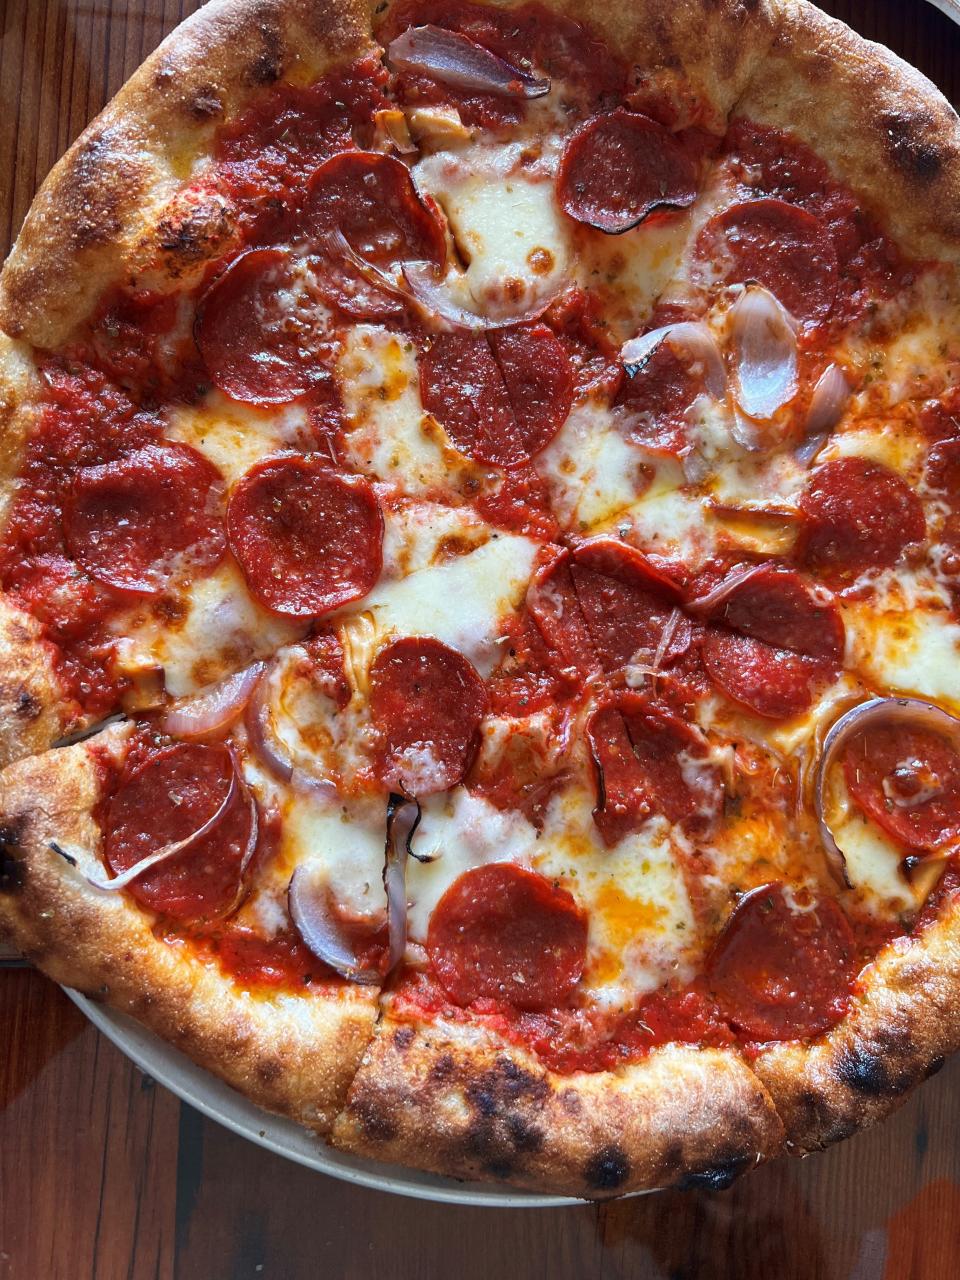 The pepperoni pizza at Ciderhouse Restaurant at Wilson's Orchard in Cumming used smoked mozzarella, shaved onions and Iowa pepperoni.